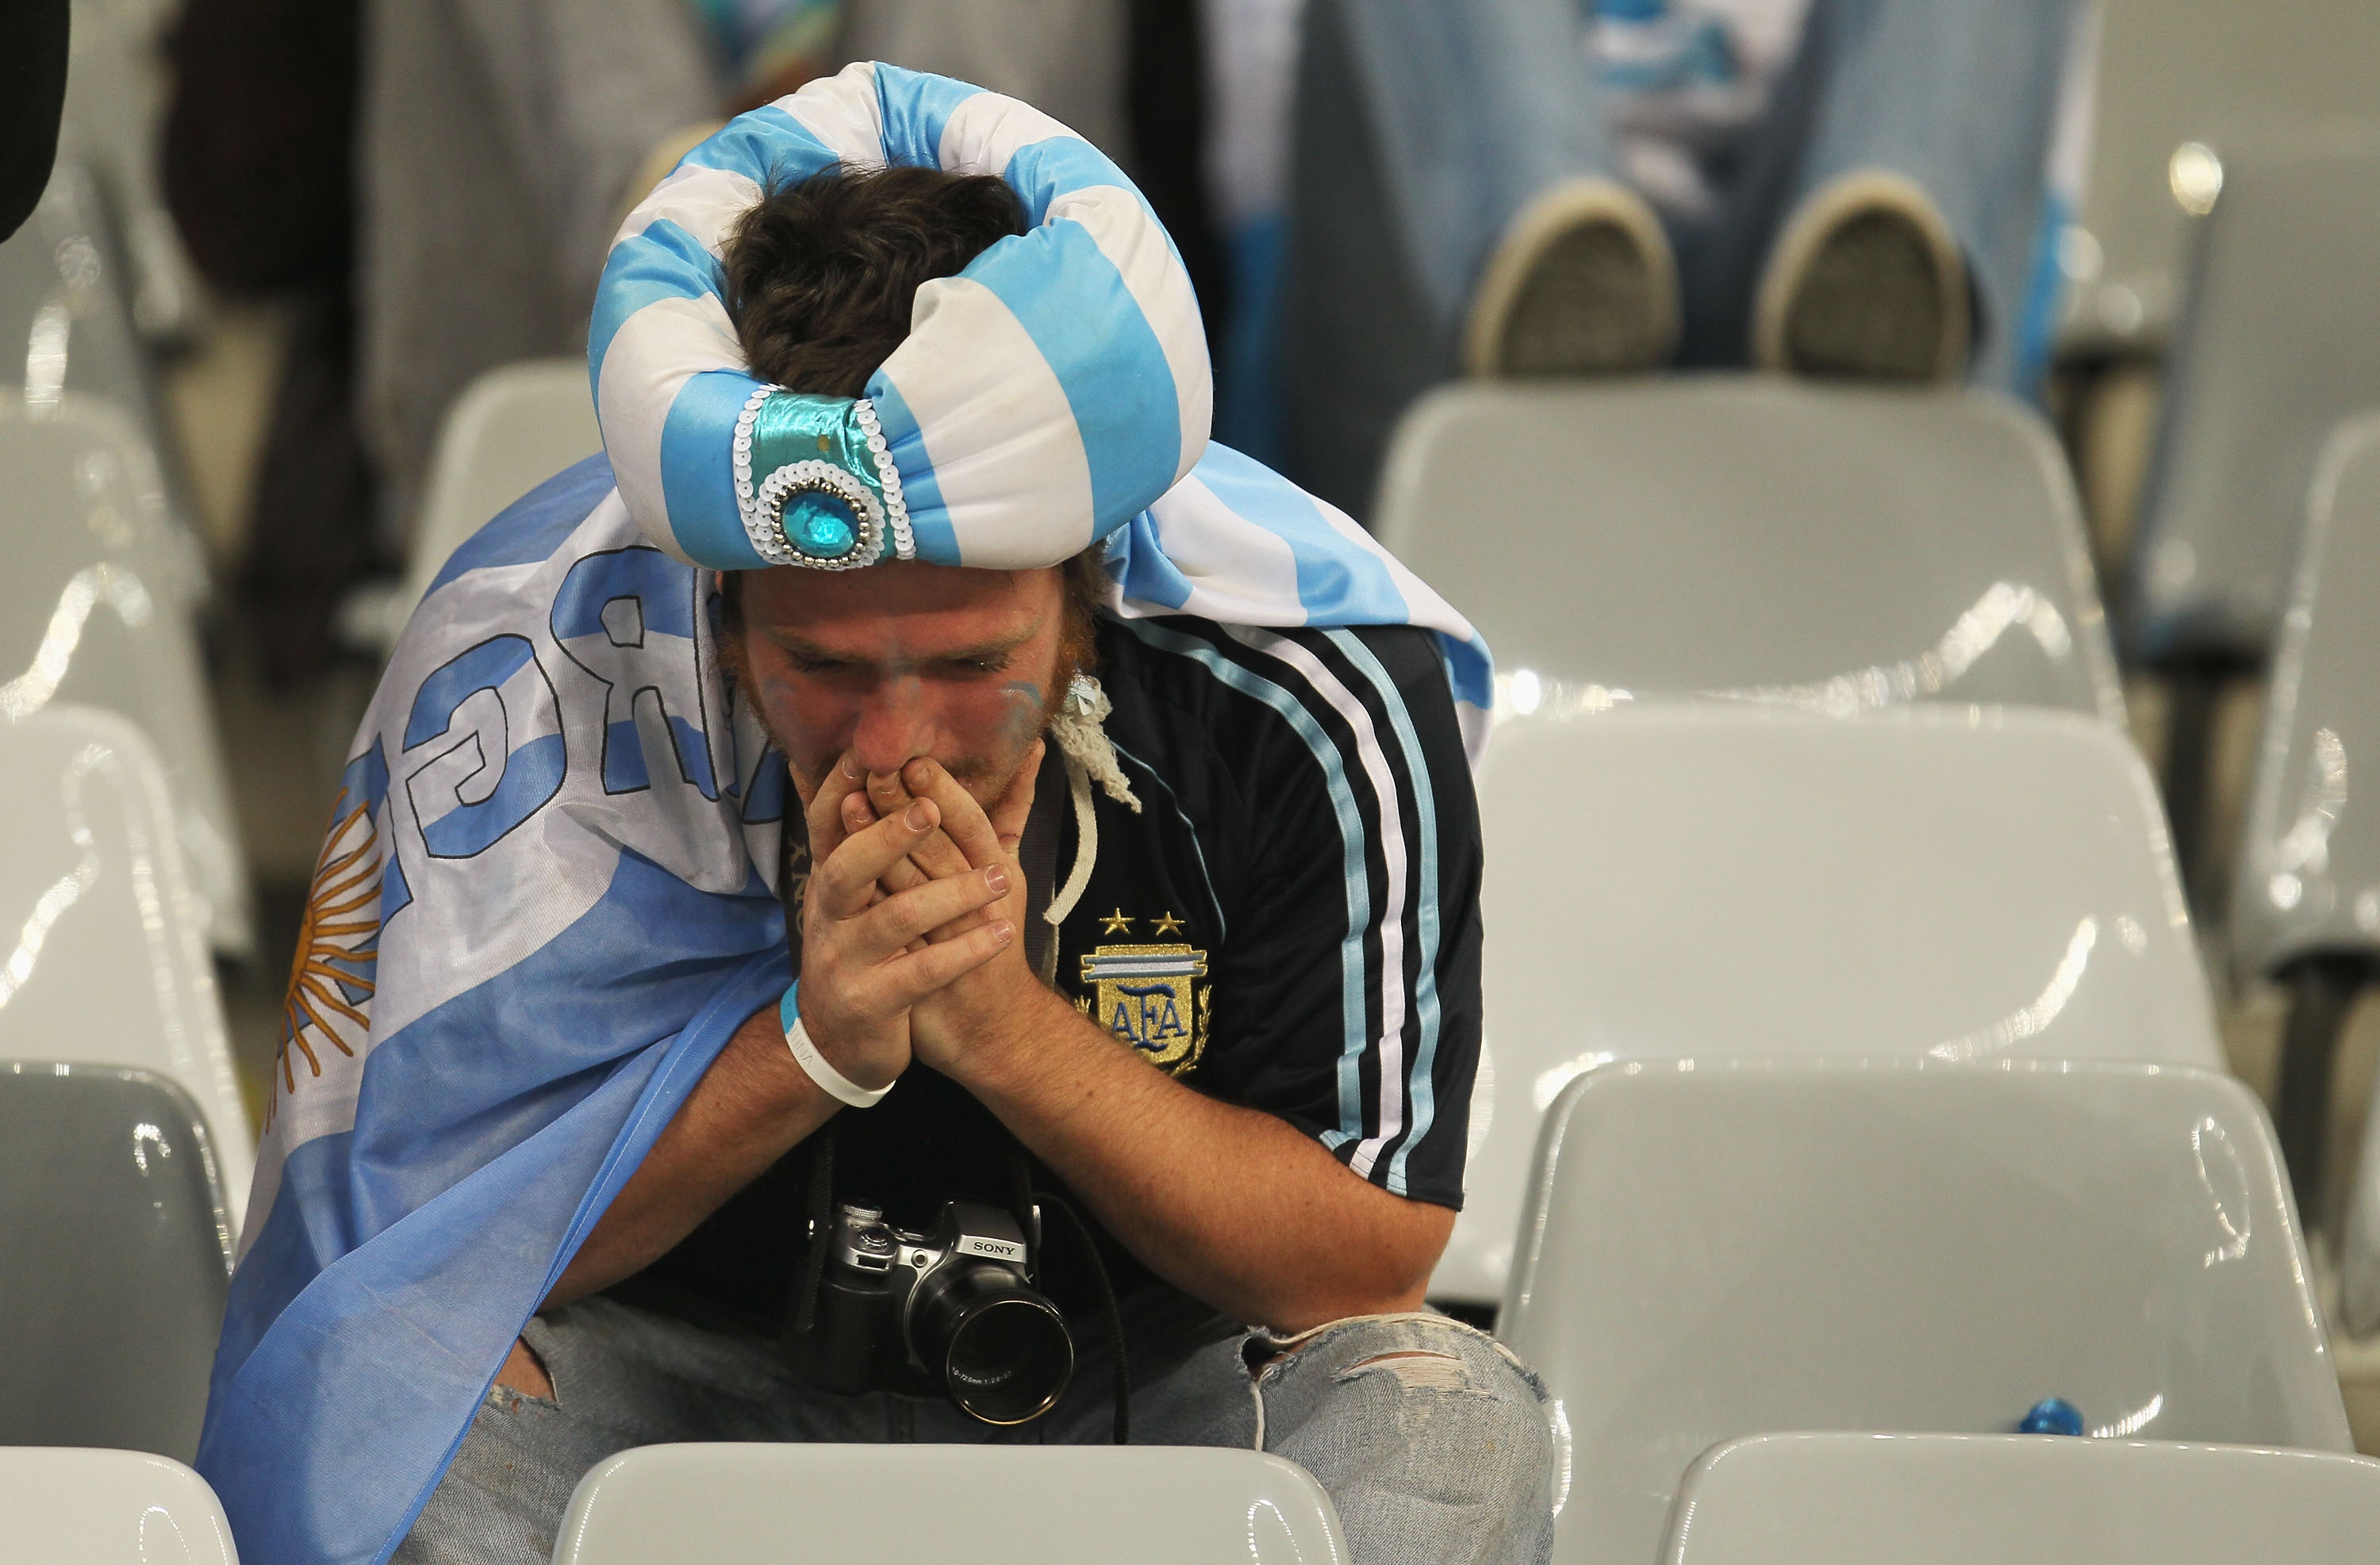 CAPE TOWN, SOUTH AFRICA - JULY 03:  A dejected Argentina fan after being knocked out of the competition following the 2010 FIFA World Cup South Africa Quarter Final match between Argentina and Germany at Green Point Stadium on July 3, 2010 in Cape Town, S